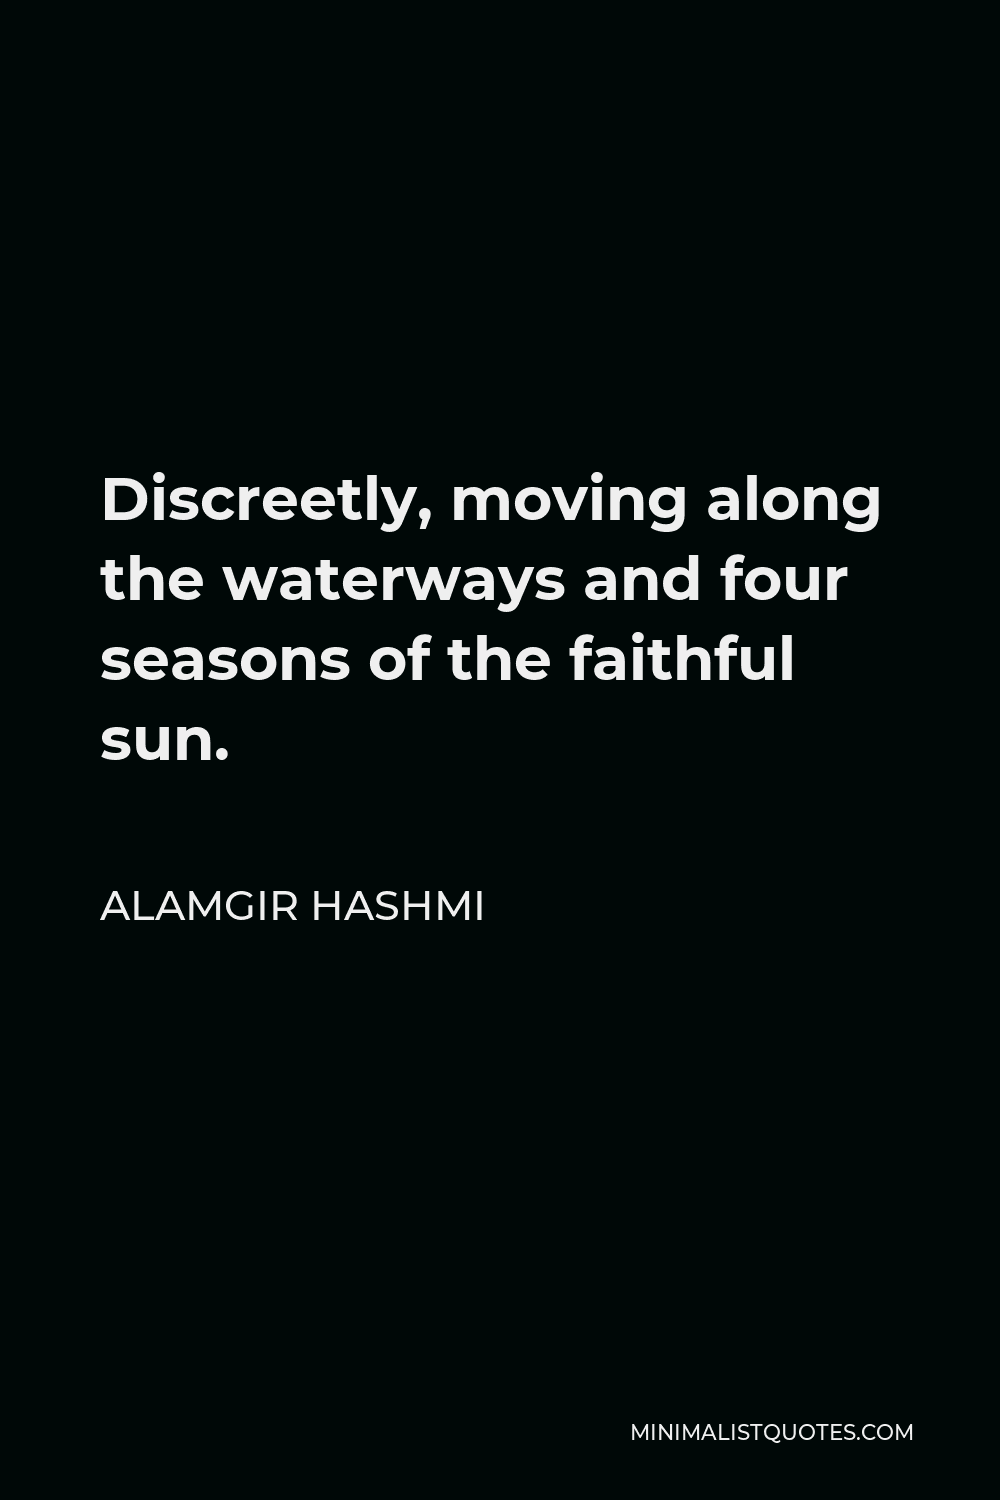 Alamgir Hashmi Quote - Discreetly, moving along the waterways and four seasons of the faithful sun.